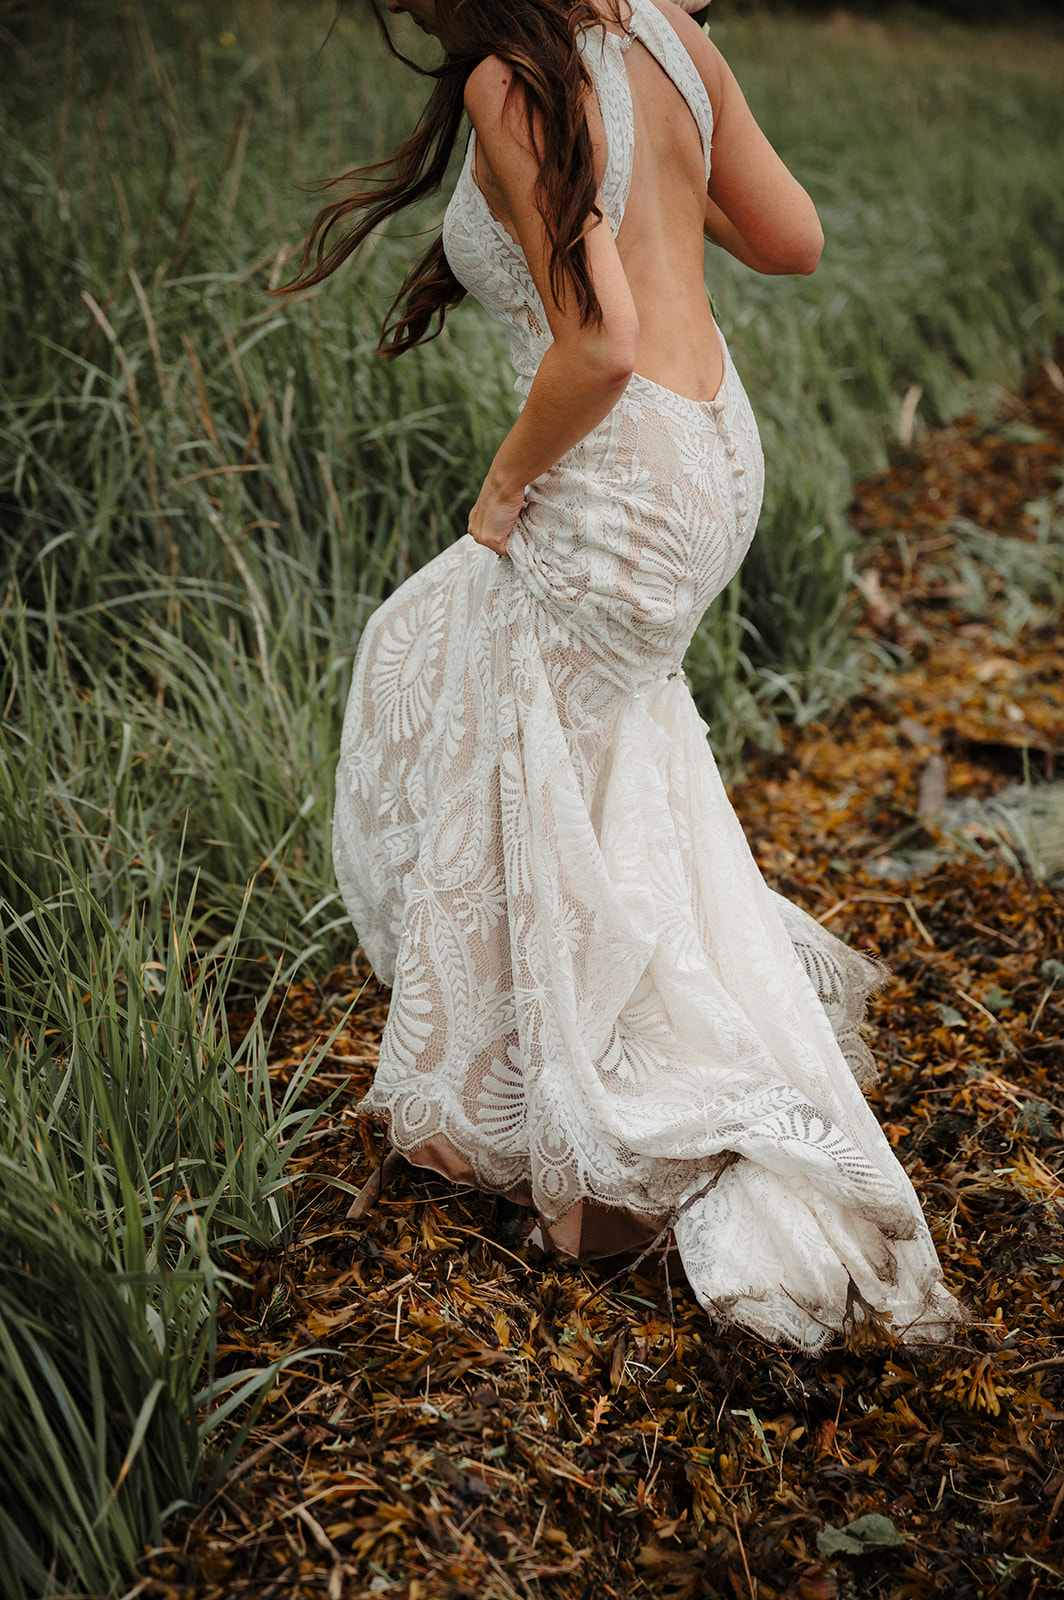 Romantic beach elopement with bride walking through the seaweed